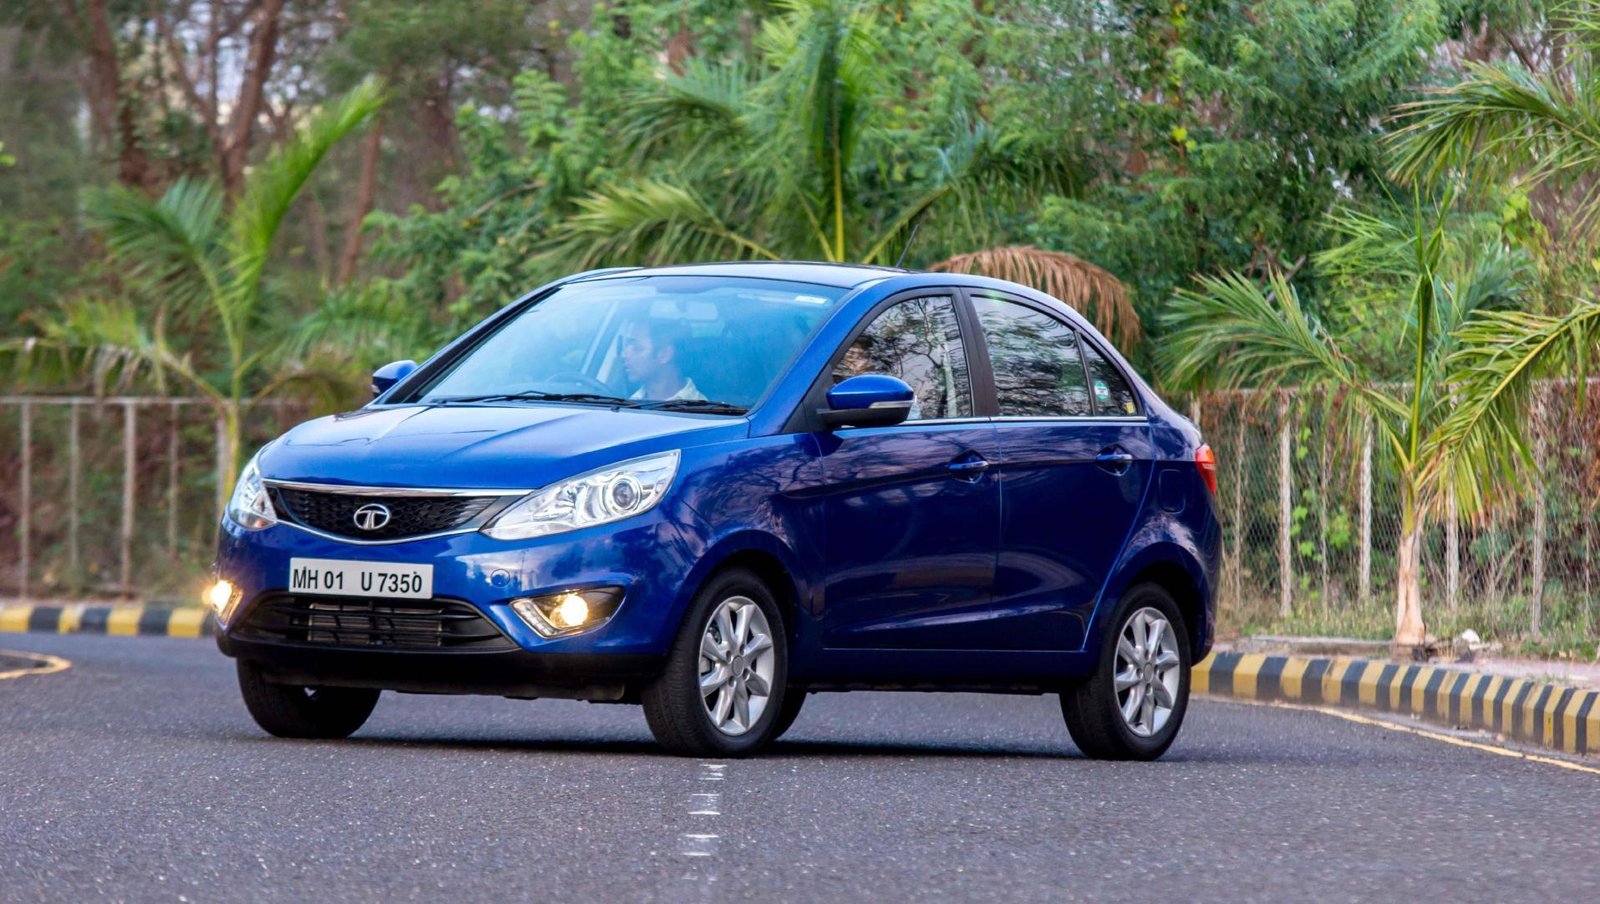 Tata-Zest-Front-view-53004_ol